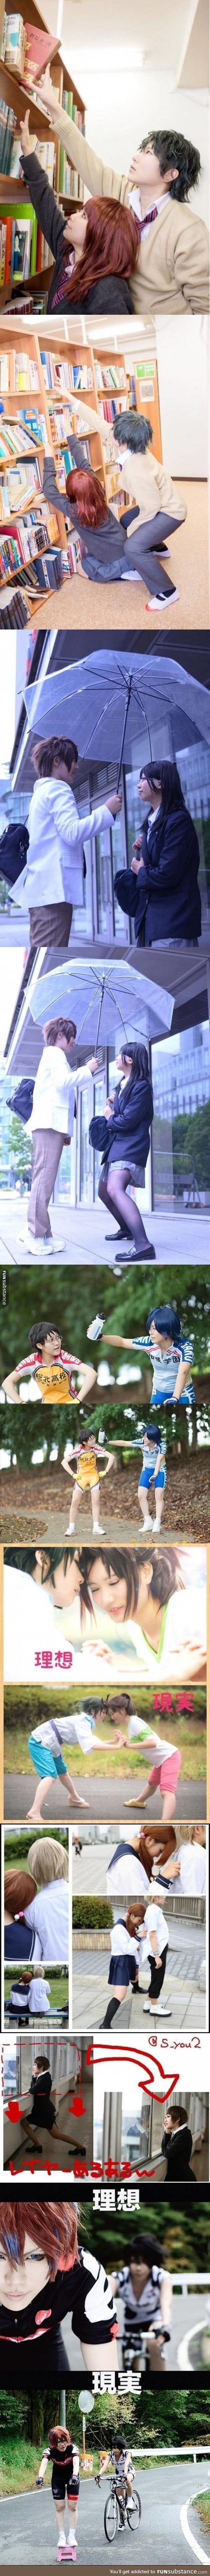 Cosplay pictures aren't always as they seem.